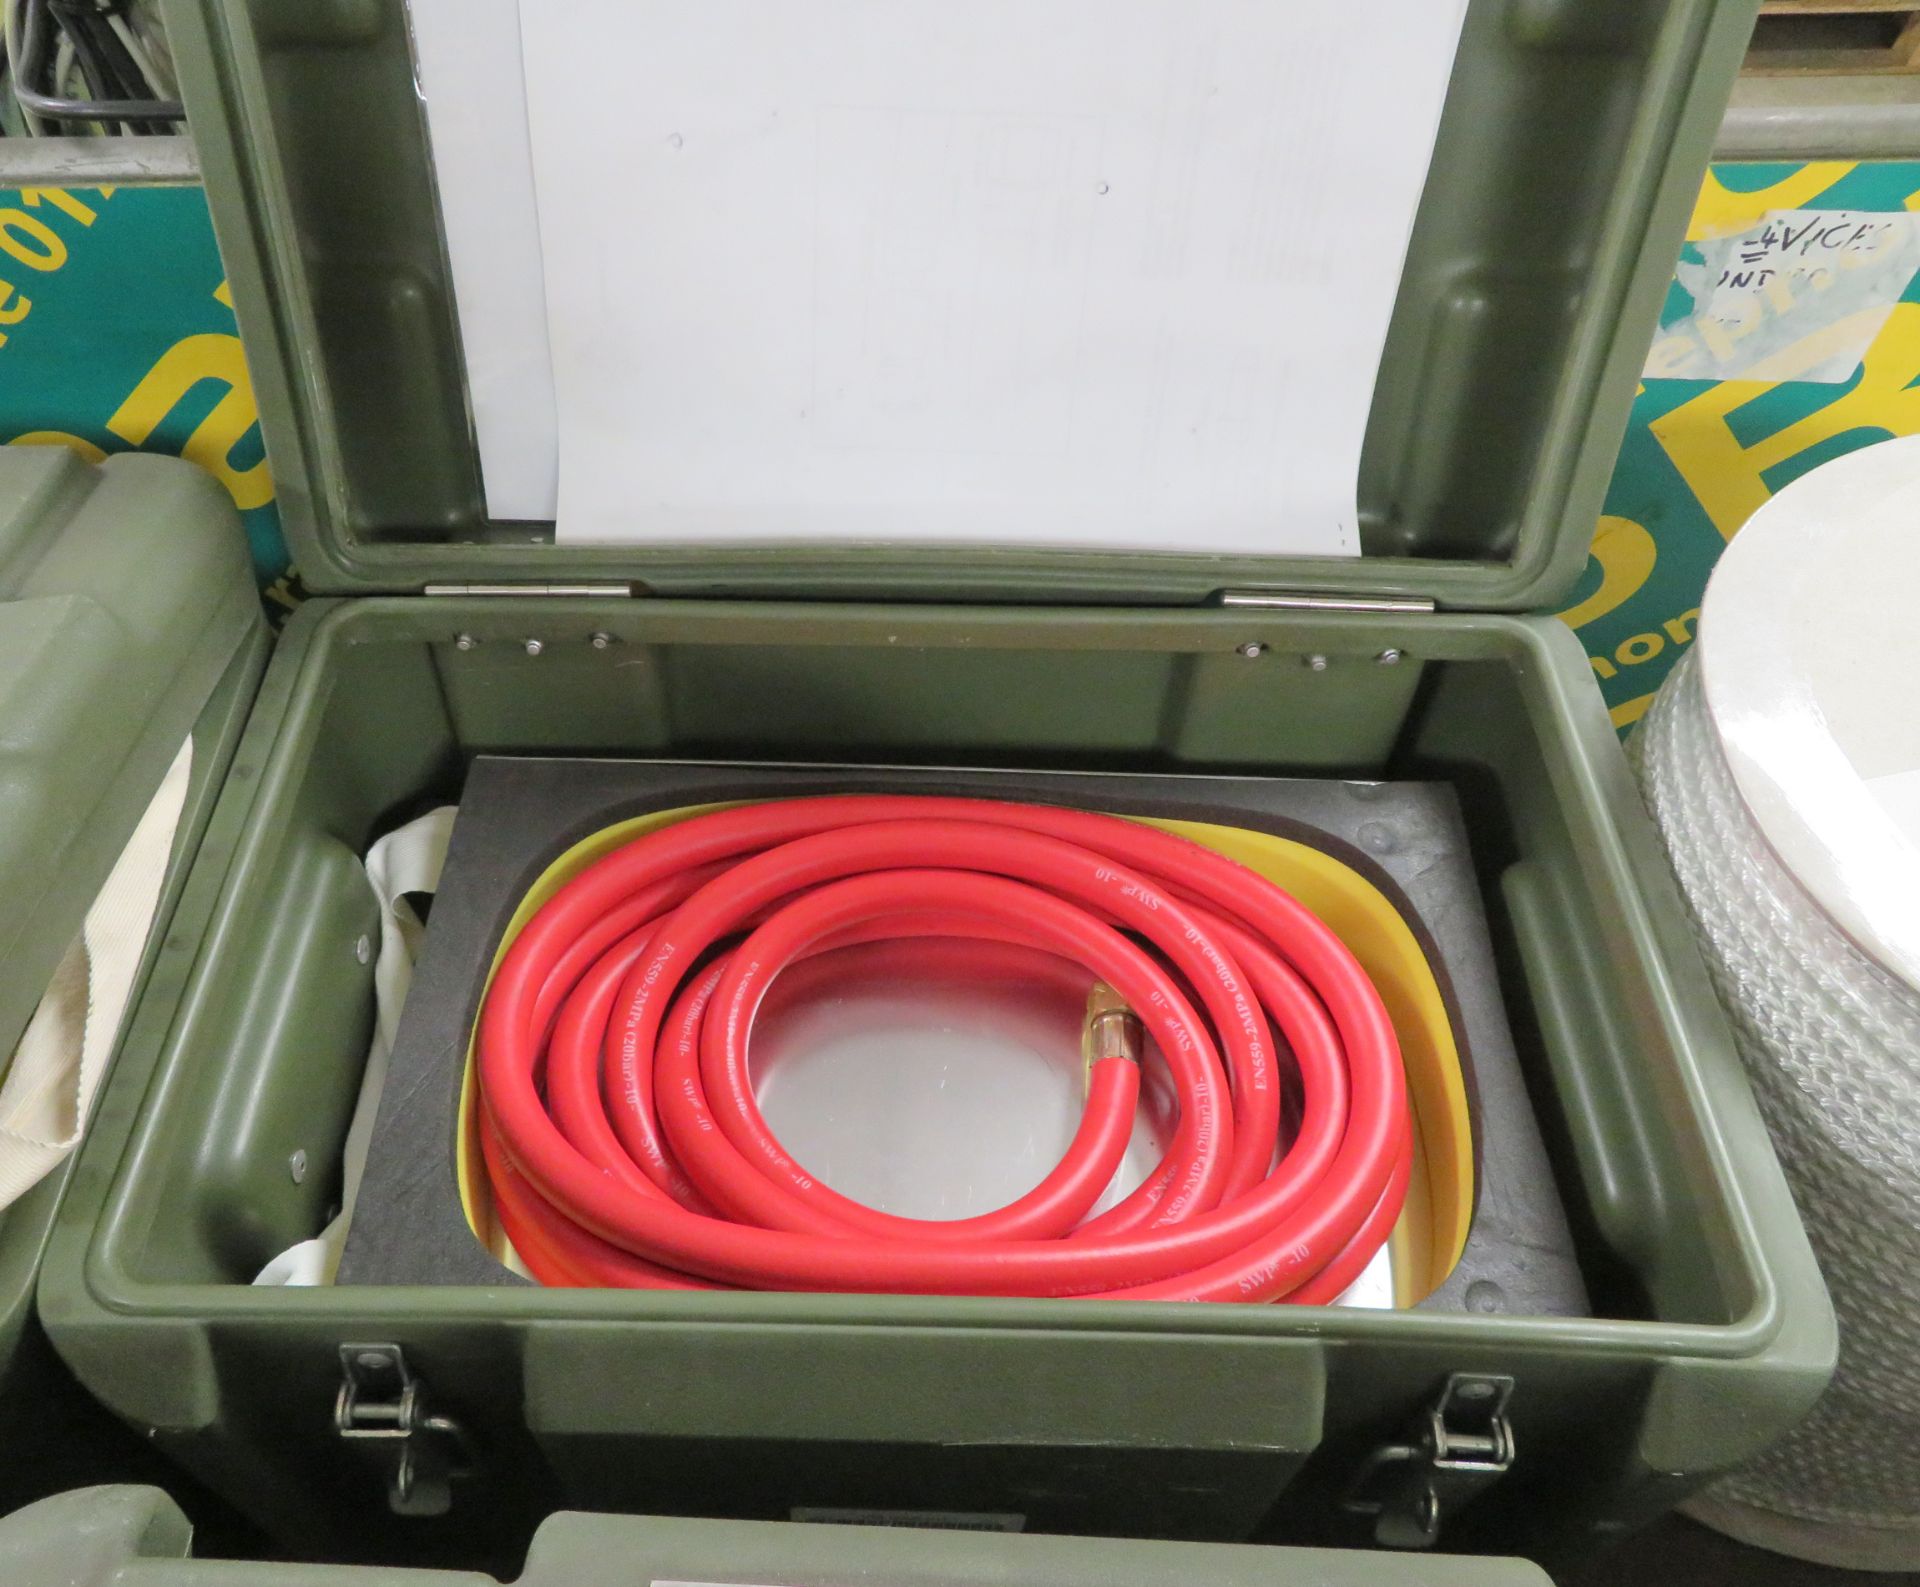 Welding Torch Outfit Cased - nozzles, hoses, connectors - Image 5 of 7